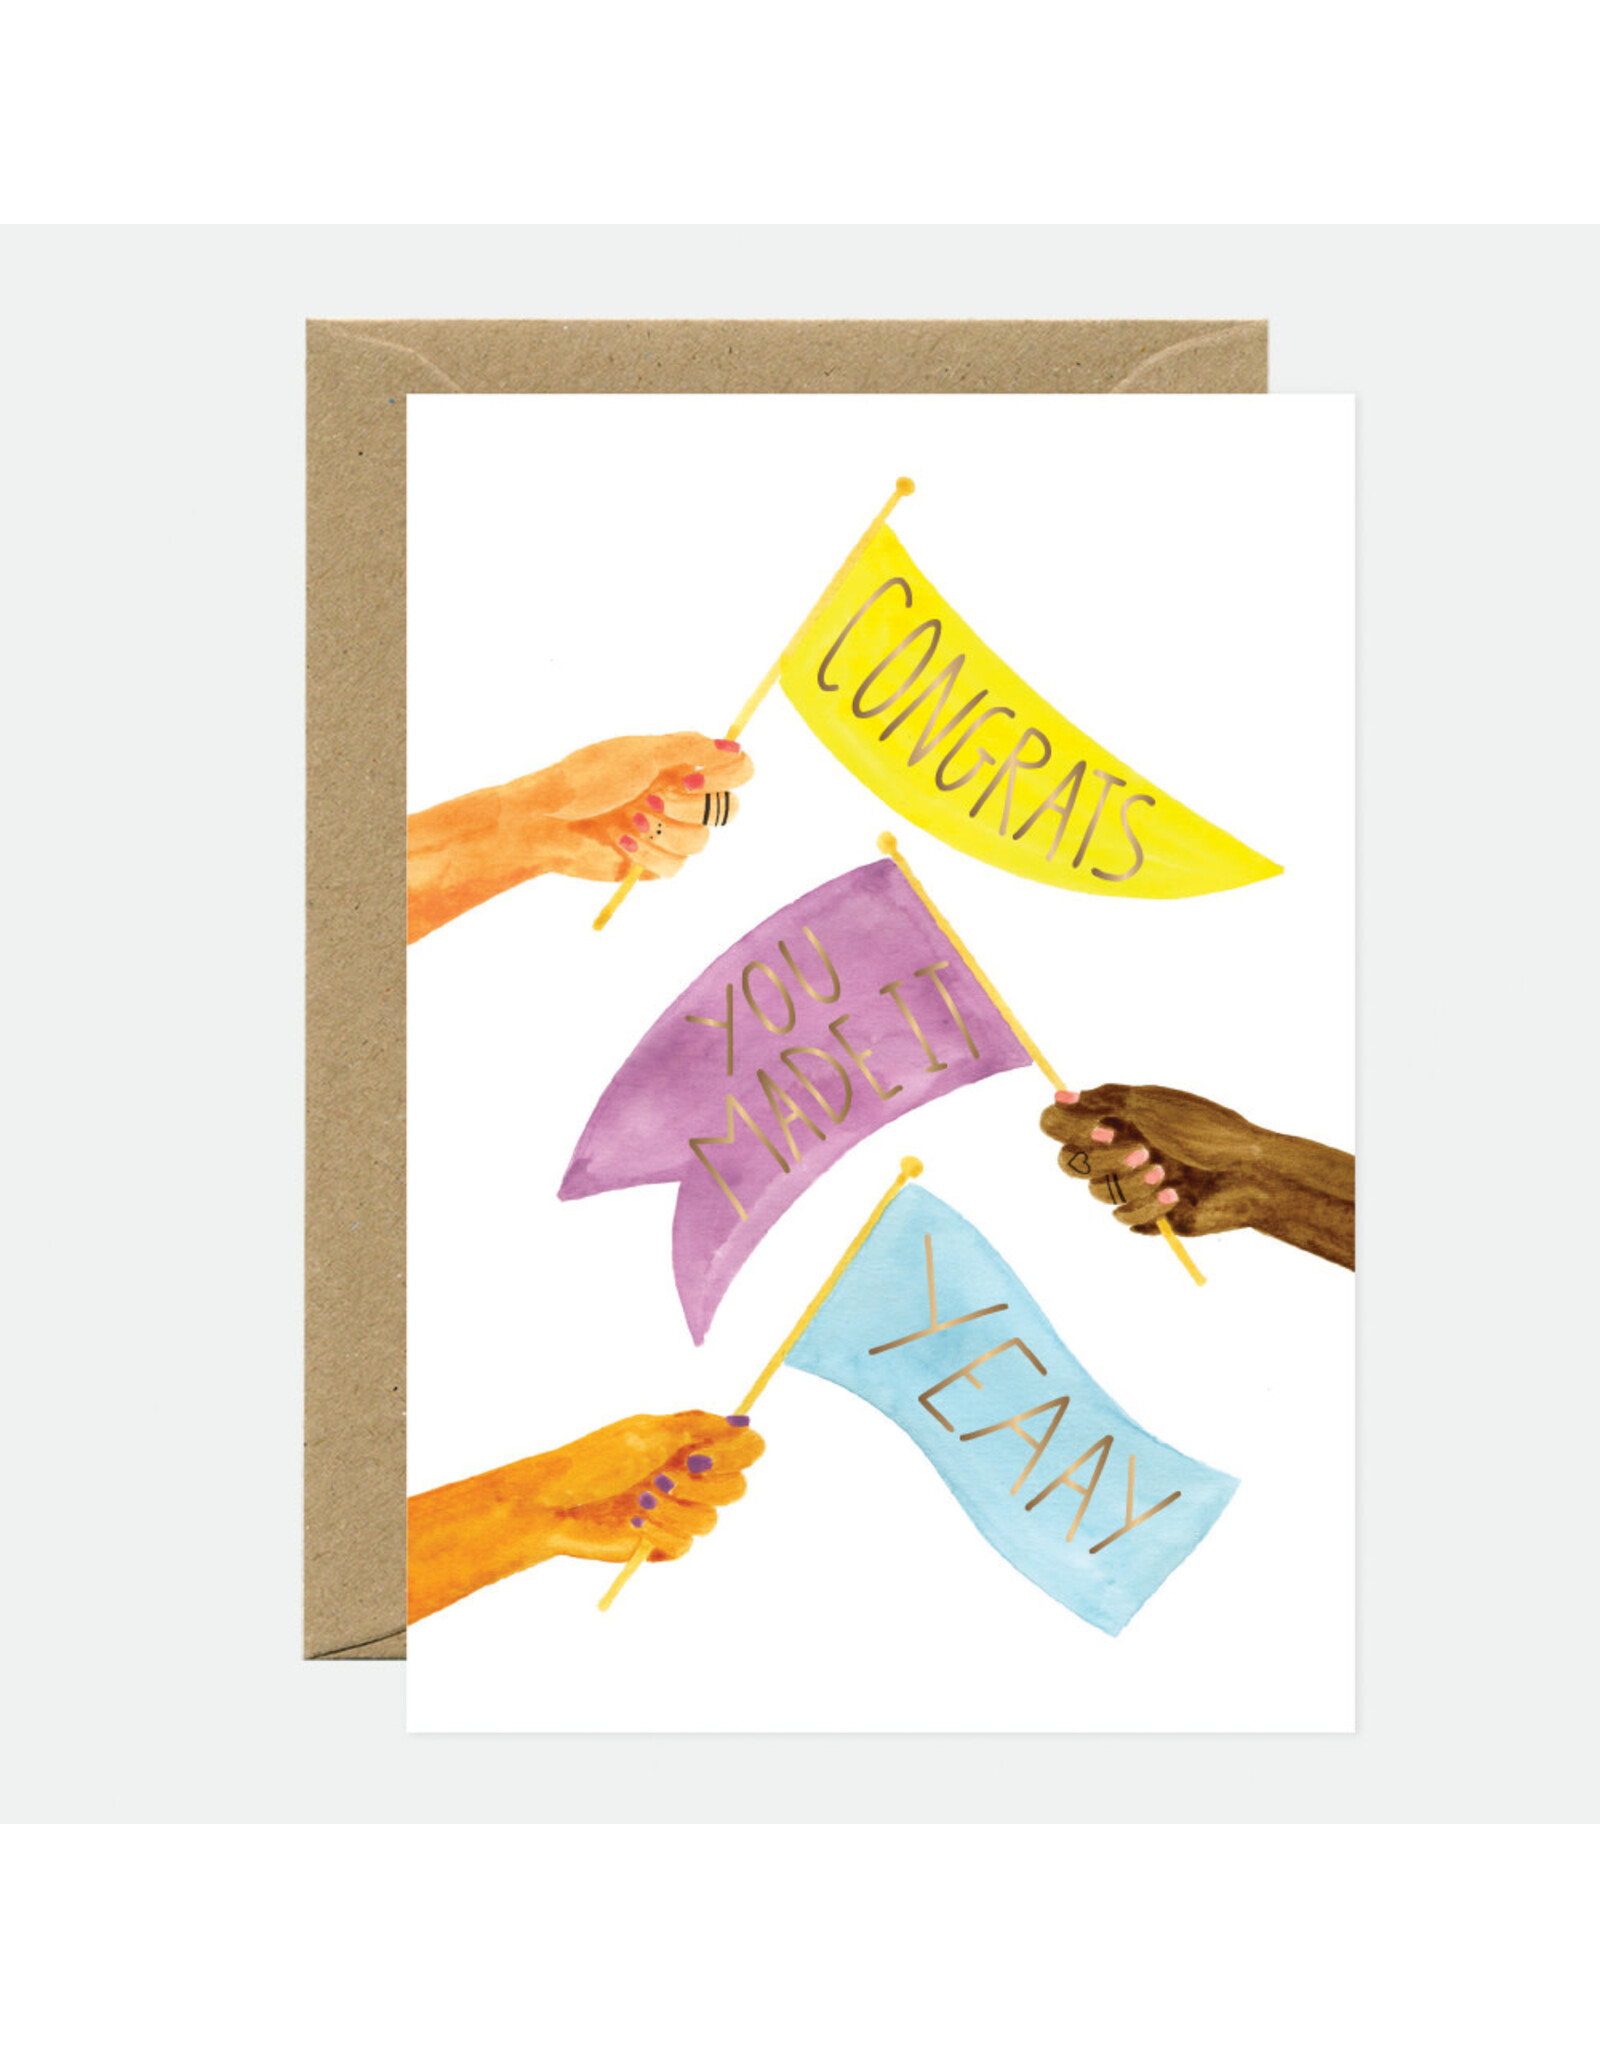 All The Ways to Say Wenskaart - Gold Congrats flags - Dubbele kaart + Envelop